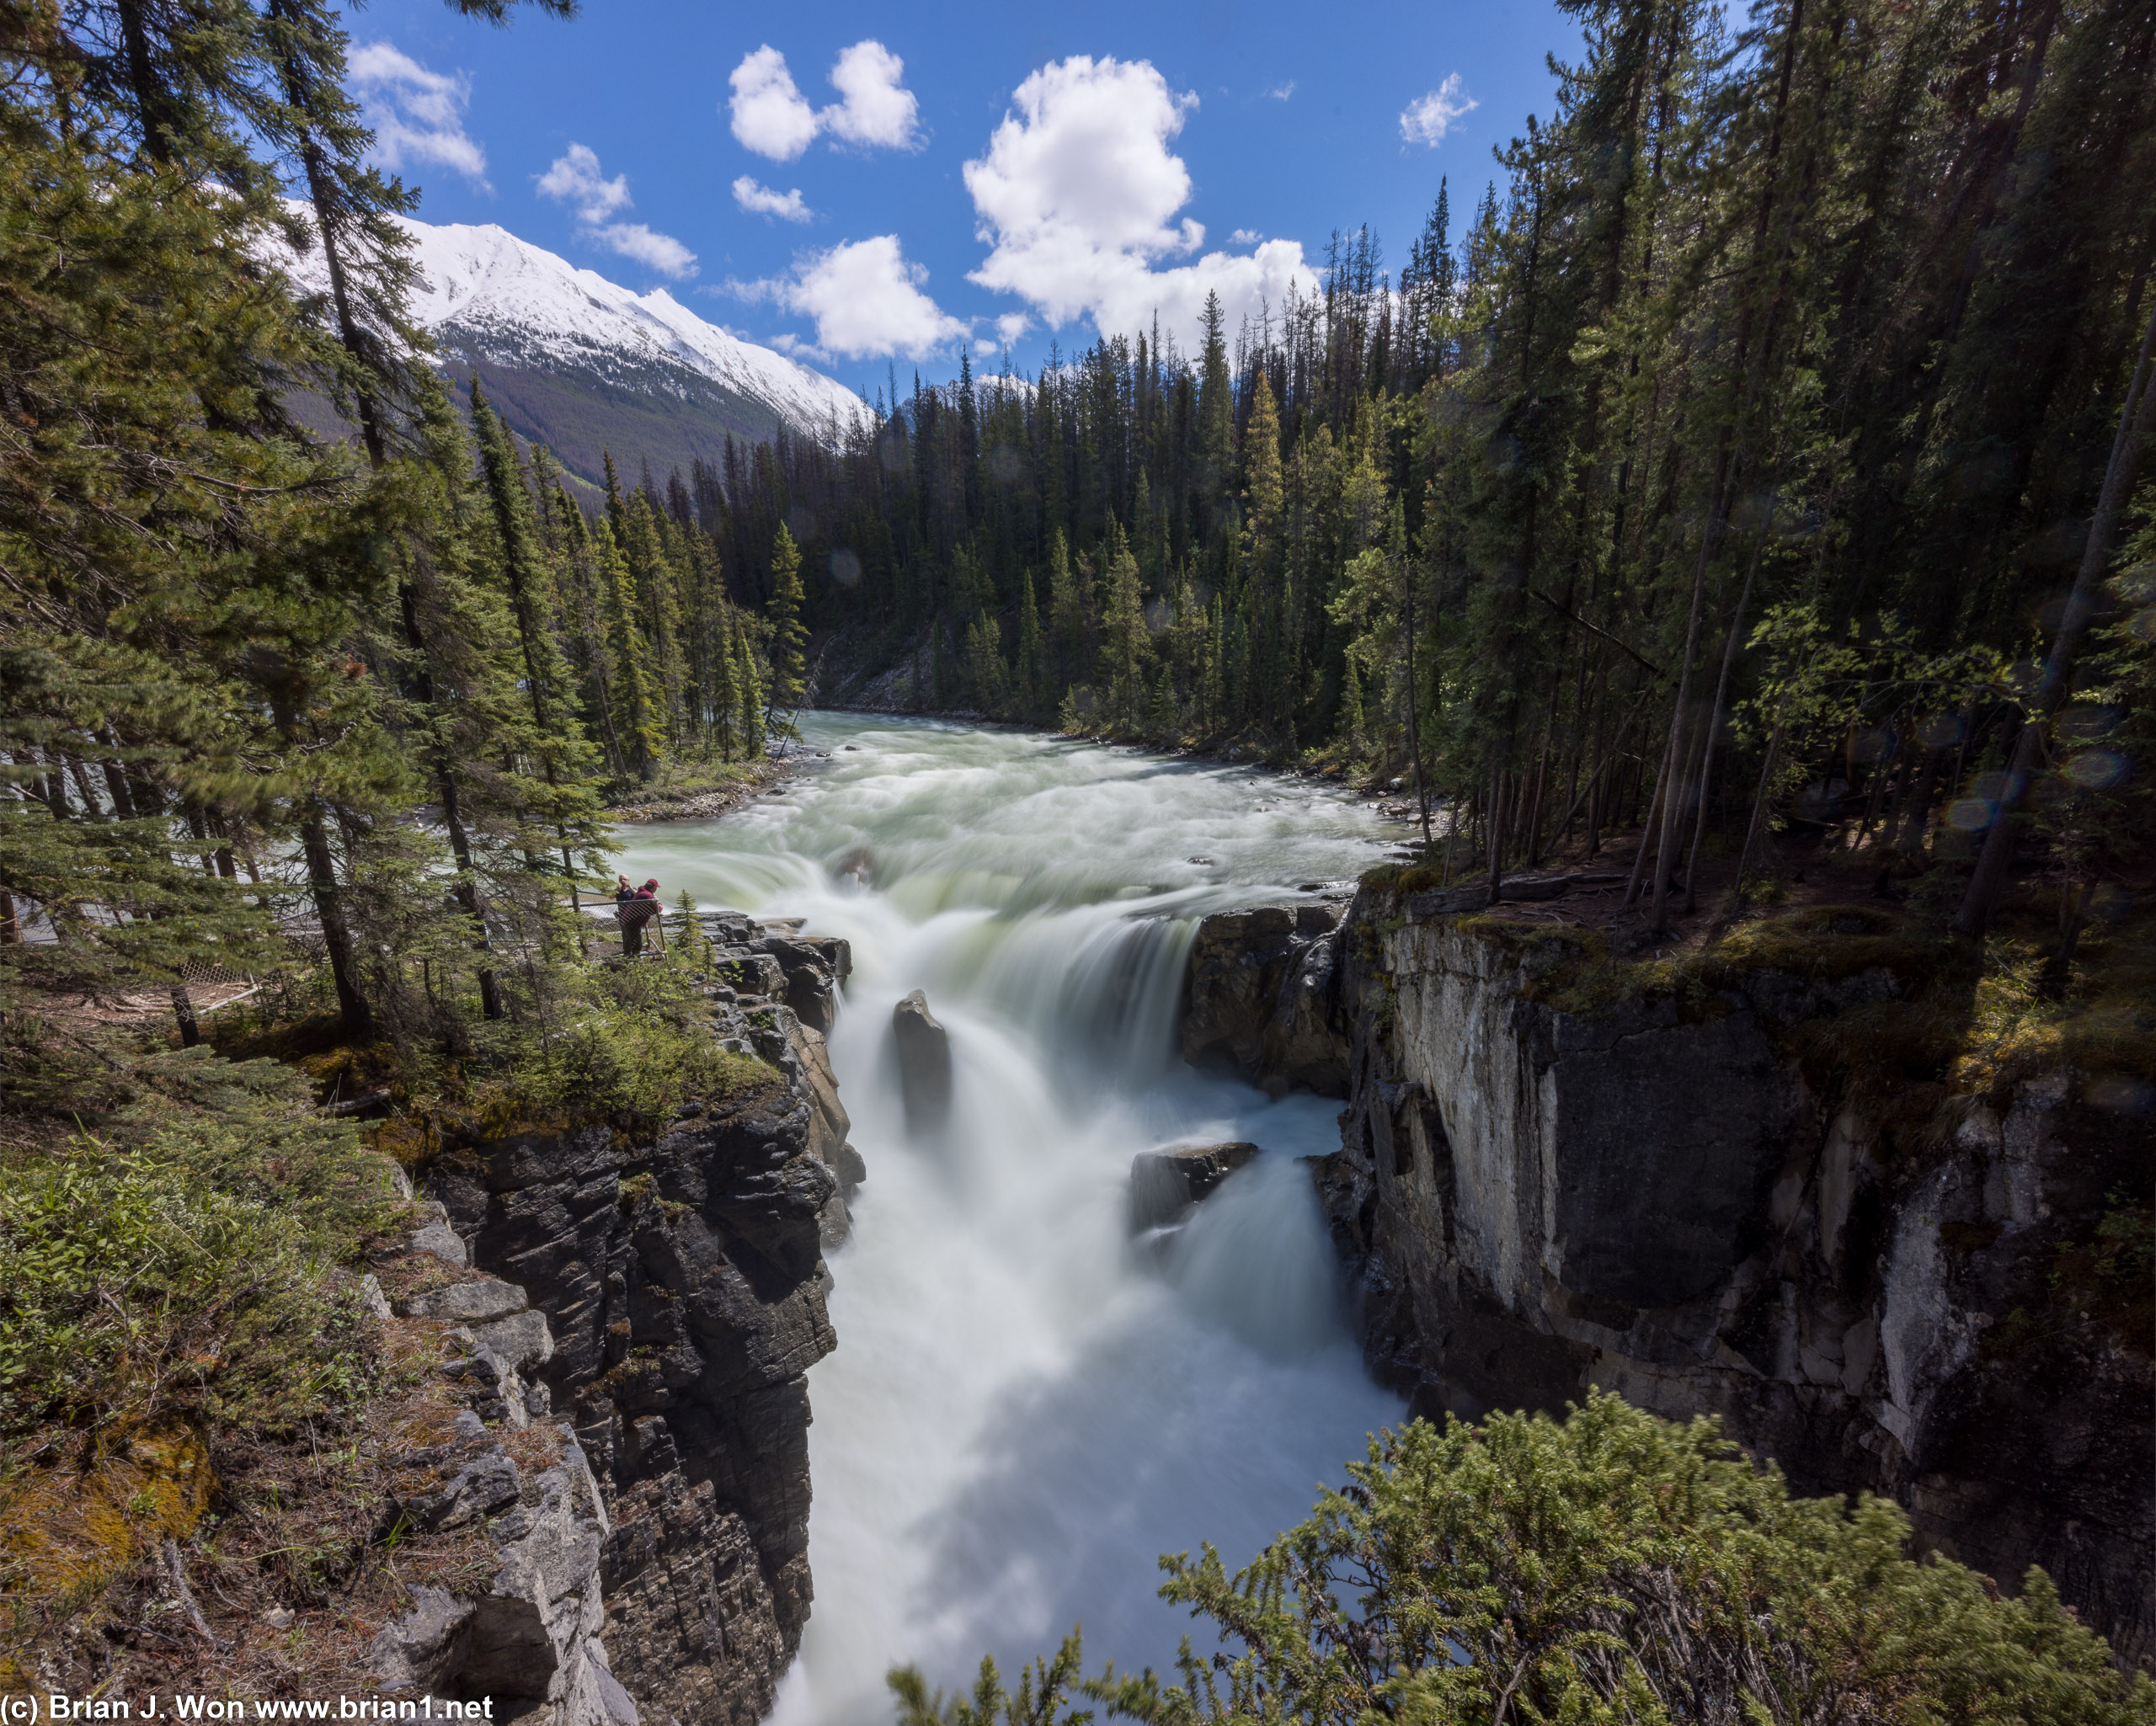 One more shot of Sunwapta Falls. Could not find the classic angle, suspect it's off-limits now?